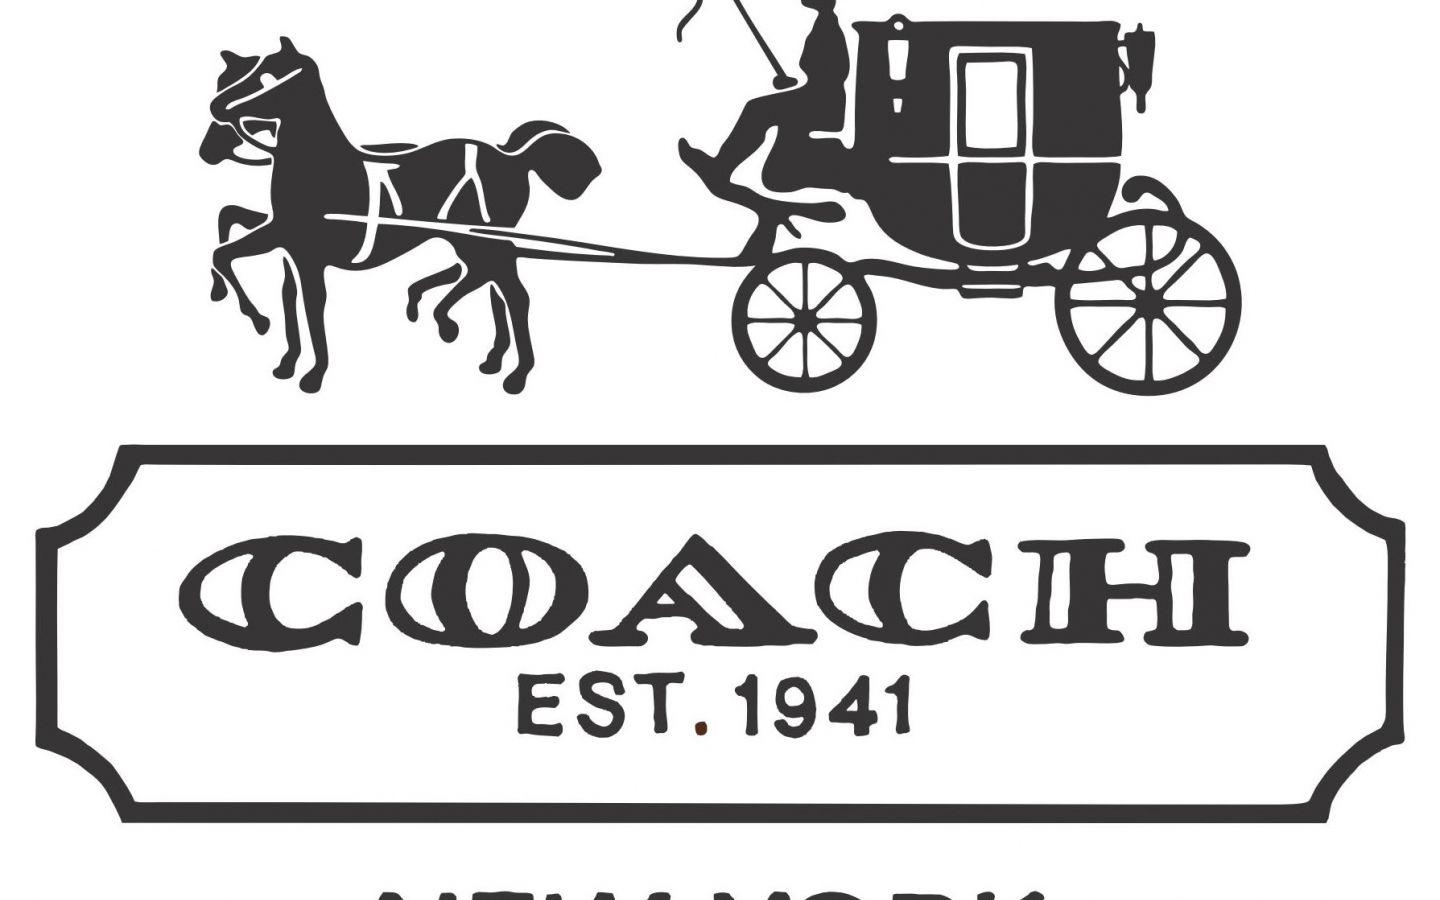 Coach bets on Fashion Week to go from overexposed to ontrend